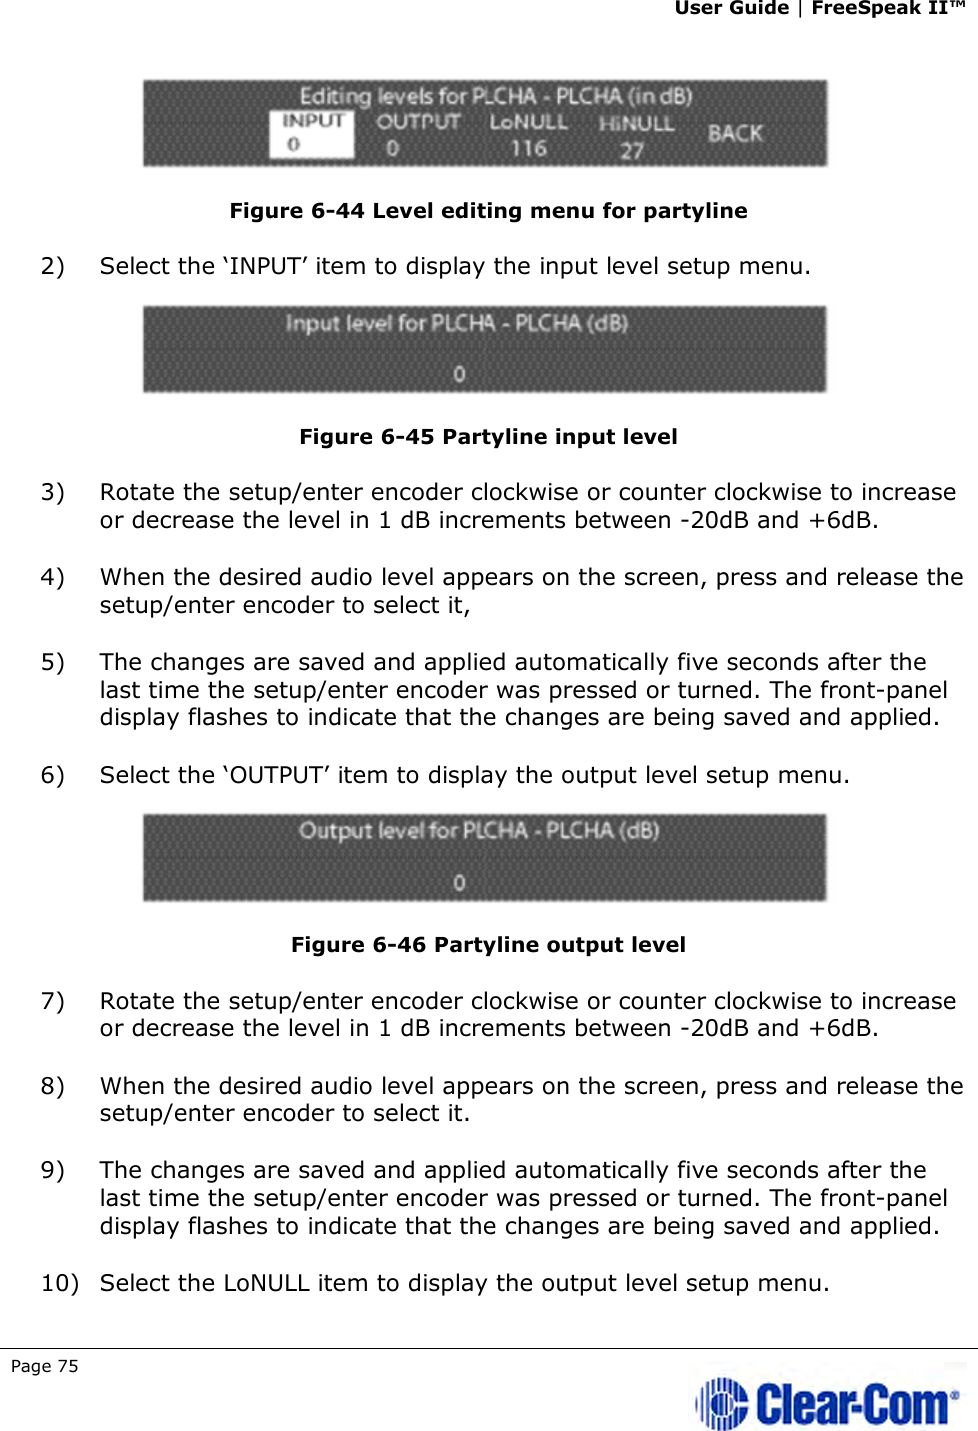 User Guide | FreeSpeak II™  Page 75    Figure 6-44 Level editing menu for partyline 2) Select the ‘INPUT’ item to display the input level setup menu.  Figure 6-45 Partyline input level 3) Rotate the setup/enter encoder clockwise or counter clockwise to increase or decrease the level in 1 dB increments between -20dB and +6dB.  4) When the desired audio level appears on the screen, press and release the setup/enter encoder to select it,  5) The changes are saved and applied automatically five seconds after the last time the setup/enter encoder was pressed or turned. The front-panel display flashes to indicate that the changes are being saved and applied.  6) Select the ‘OUTPUT’ item to display the output level setup menu.  Figure 6-46 Partyline output level 7) Rotate the setup/enter encoder clockwise or counter clockwise to increase or decrease the level in 1 dB increments between -20dB and +6dB.  8) When the desired audio level appears on the screen, press and release the setup/enter encoder to select it. 9) The changes are saved and applied automatically five seconds after the last time the setup/enter encoder was pressed or turned. The front-panel display flashes to indicate that the changes are being saved and applied.  10) Select the LoNULL item to display the output level setup menu. 